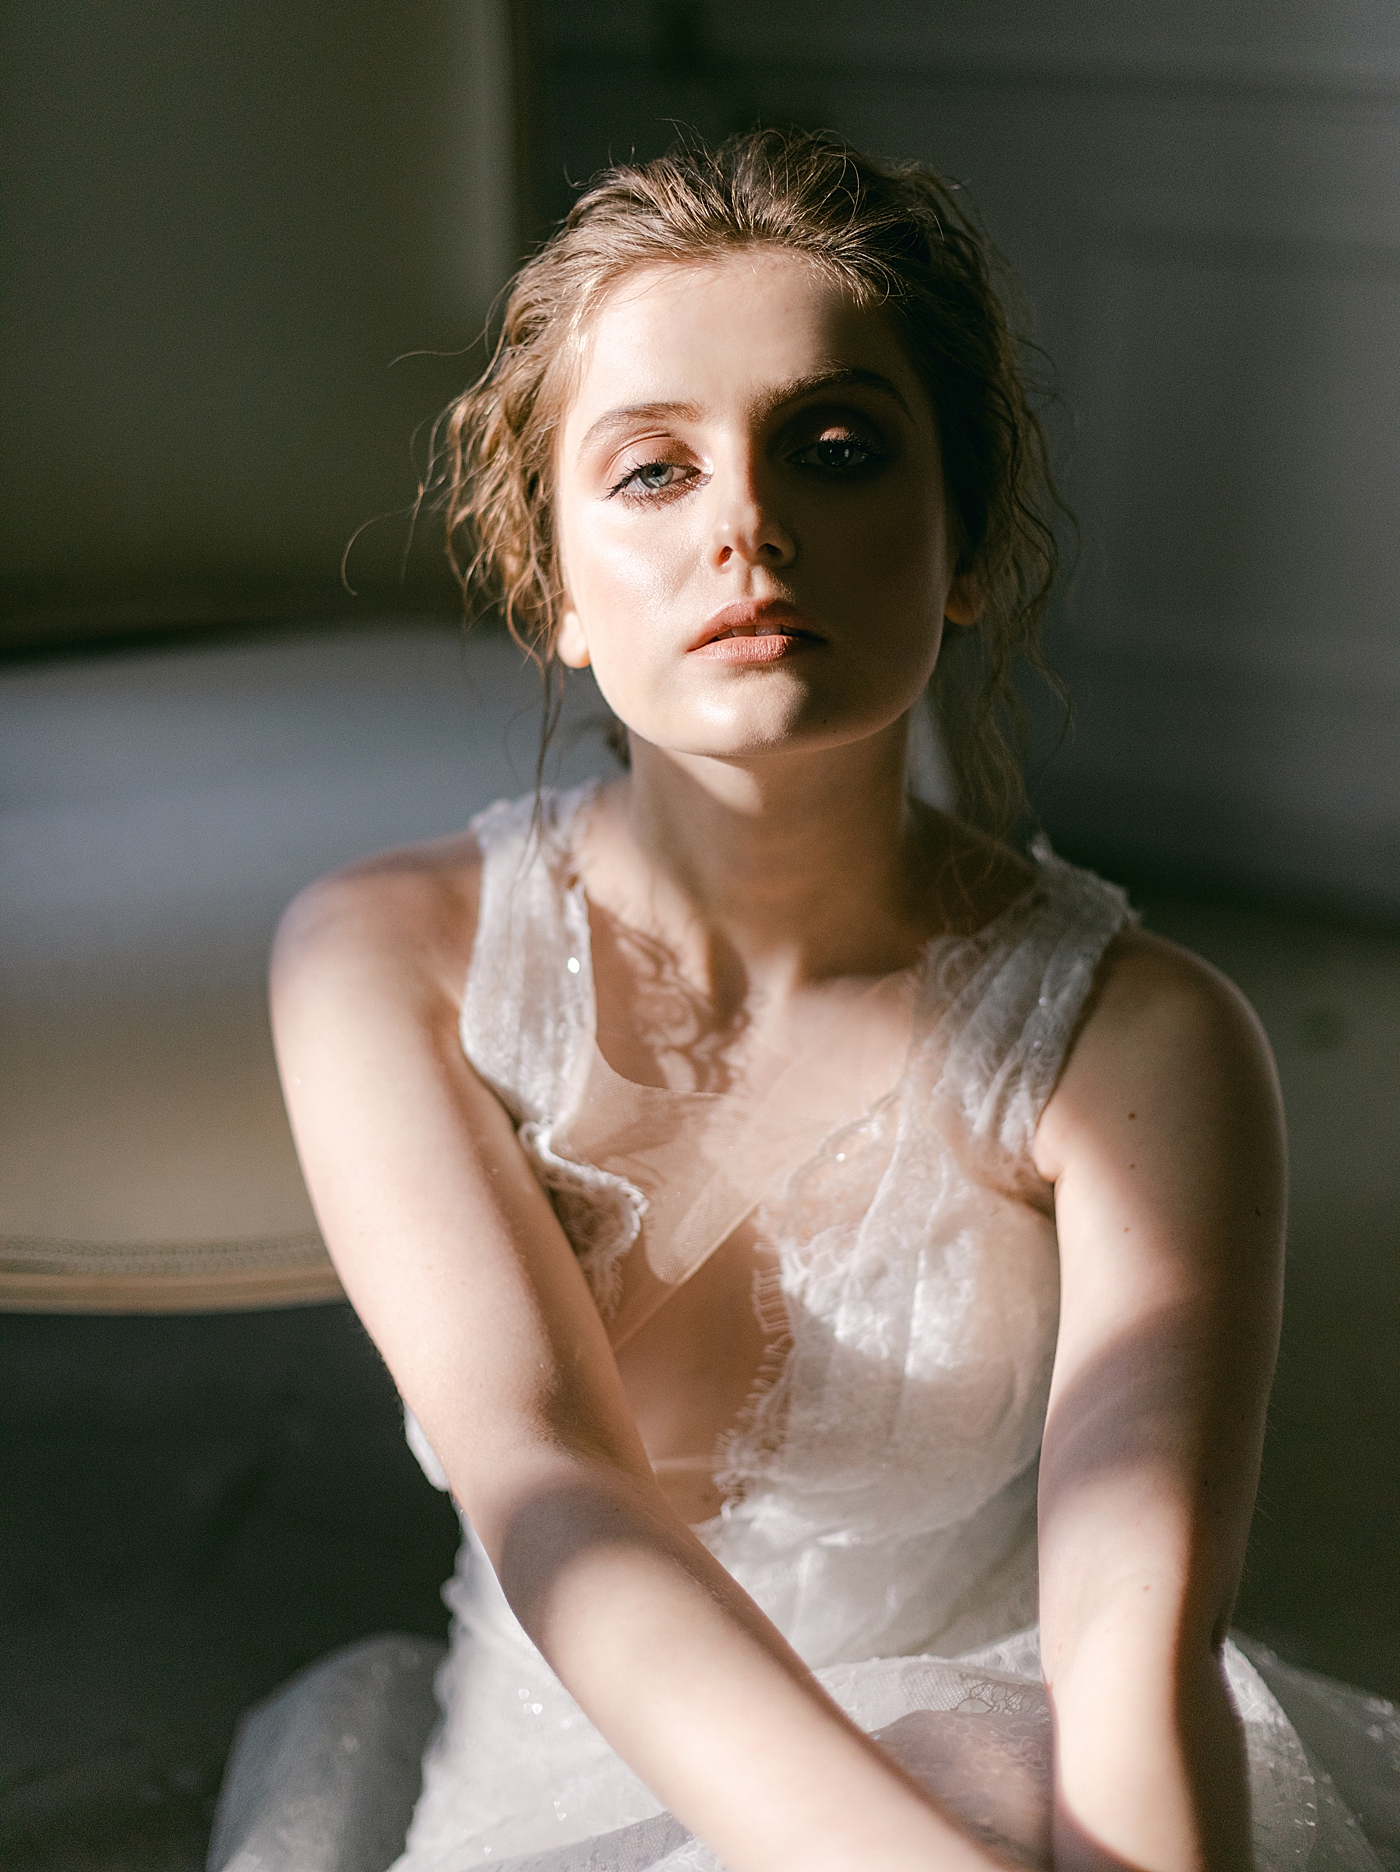 Bride in beautiful harsh lighting sitting on the floor | Photo by Hope Helmuth Photograpghy